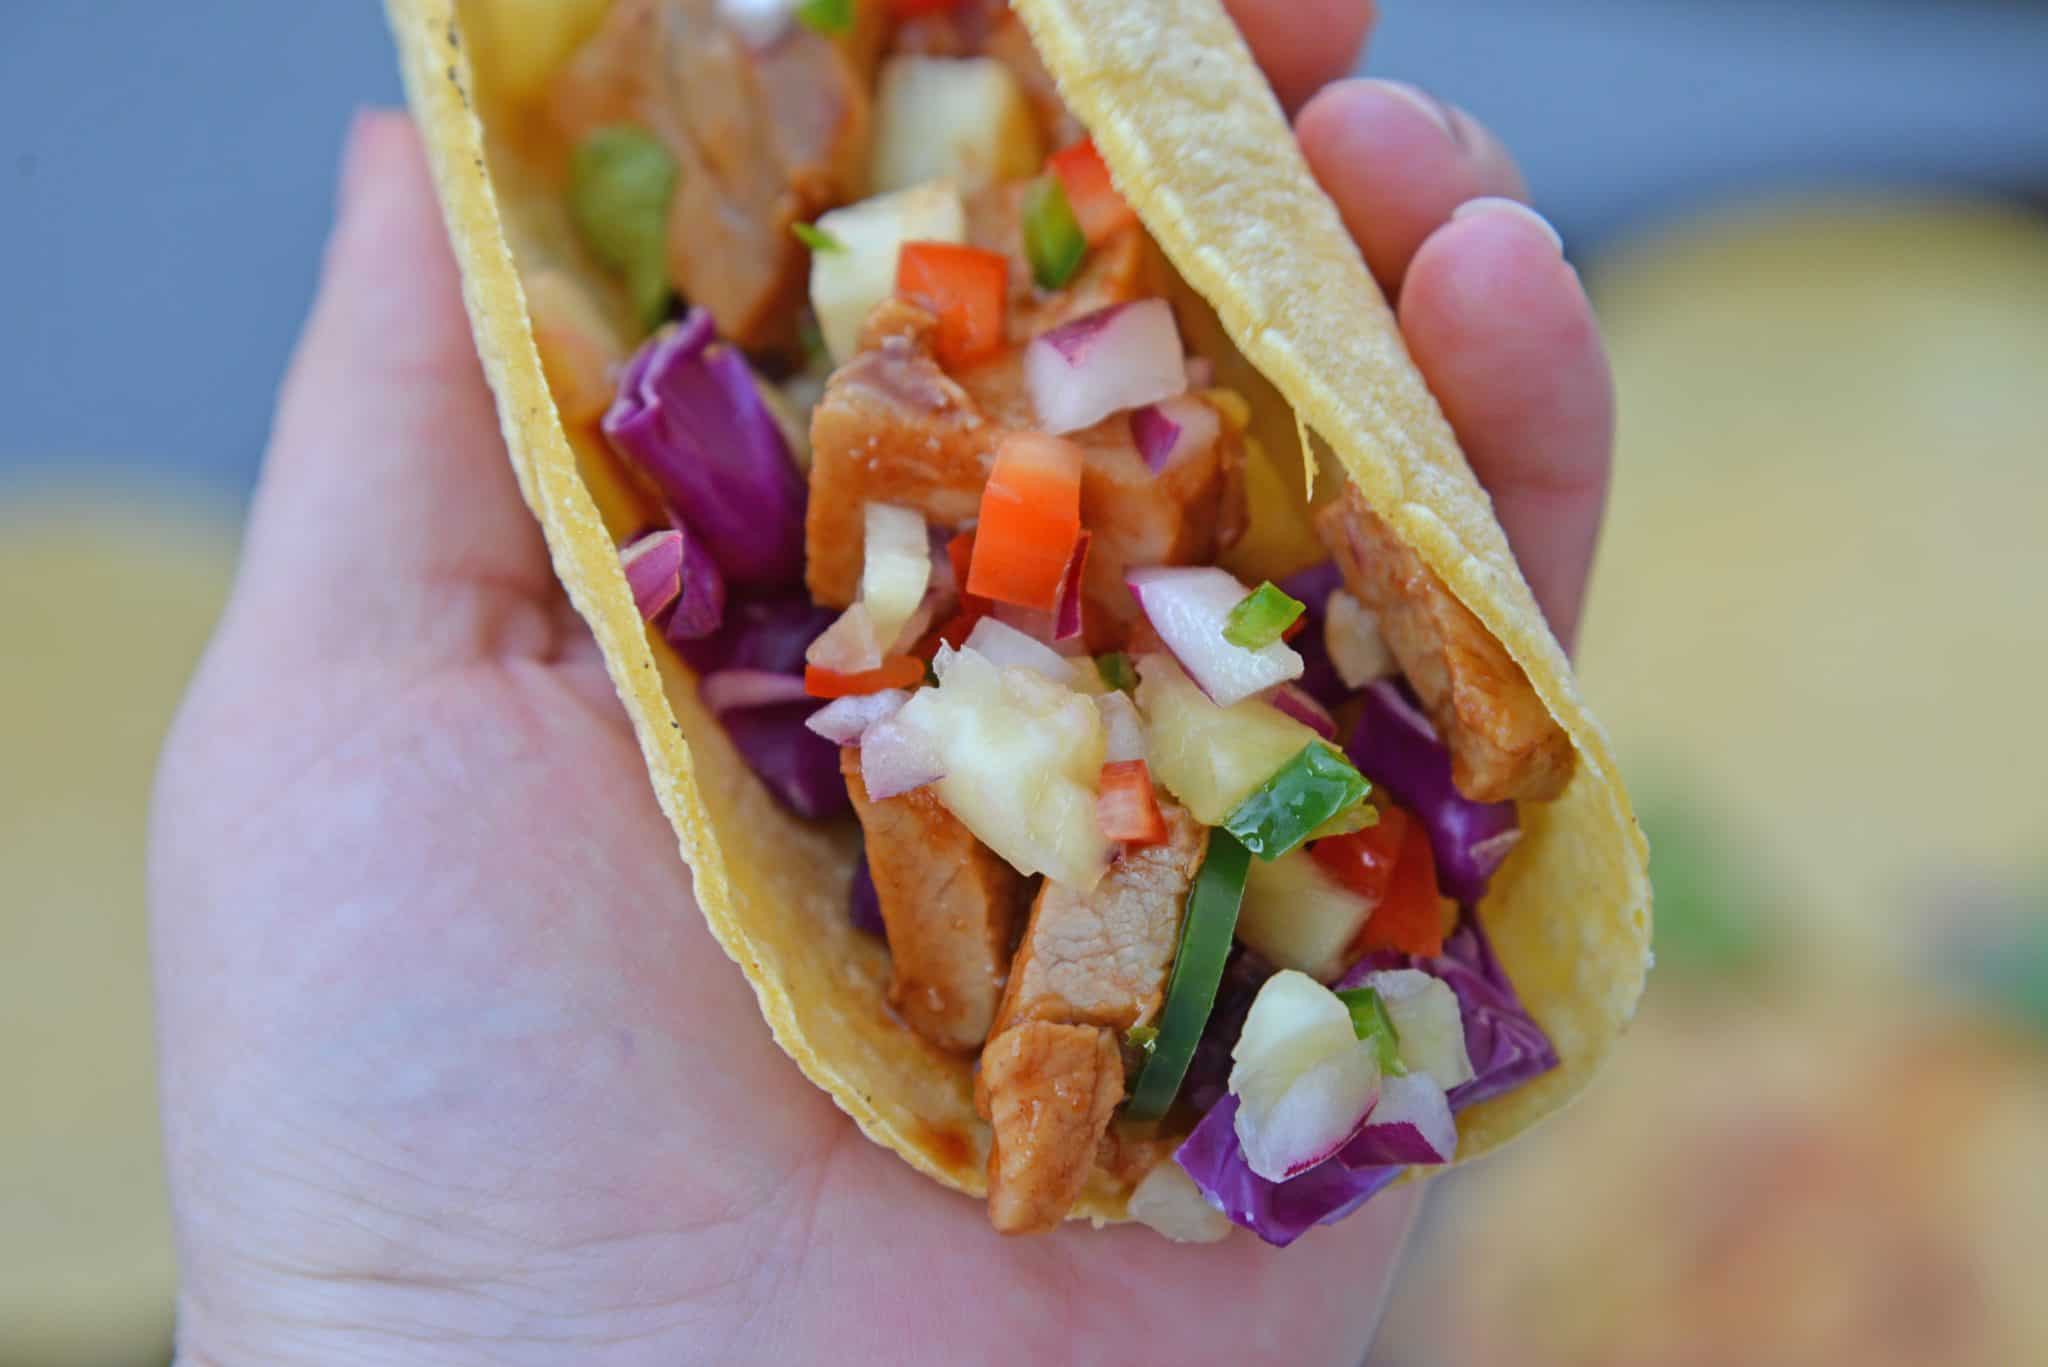 BBQ Pork Tacos are a colorful and easy weeknight dinner. Zesty BBQ sauce paired with sweet and spicy pineapple salsa and crunchy red cabbage. #porktacos #tacotuesday www.savoryexperiments.com